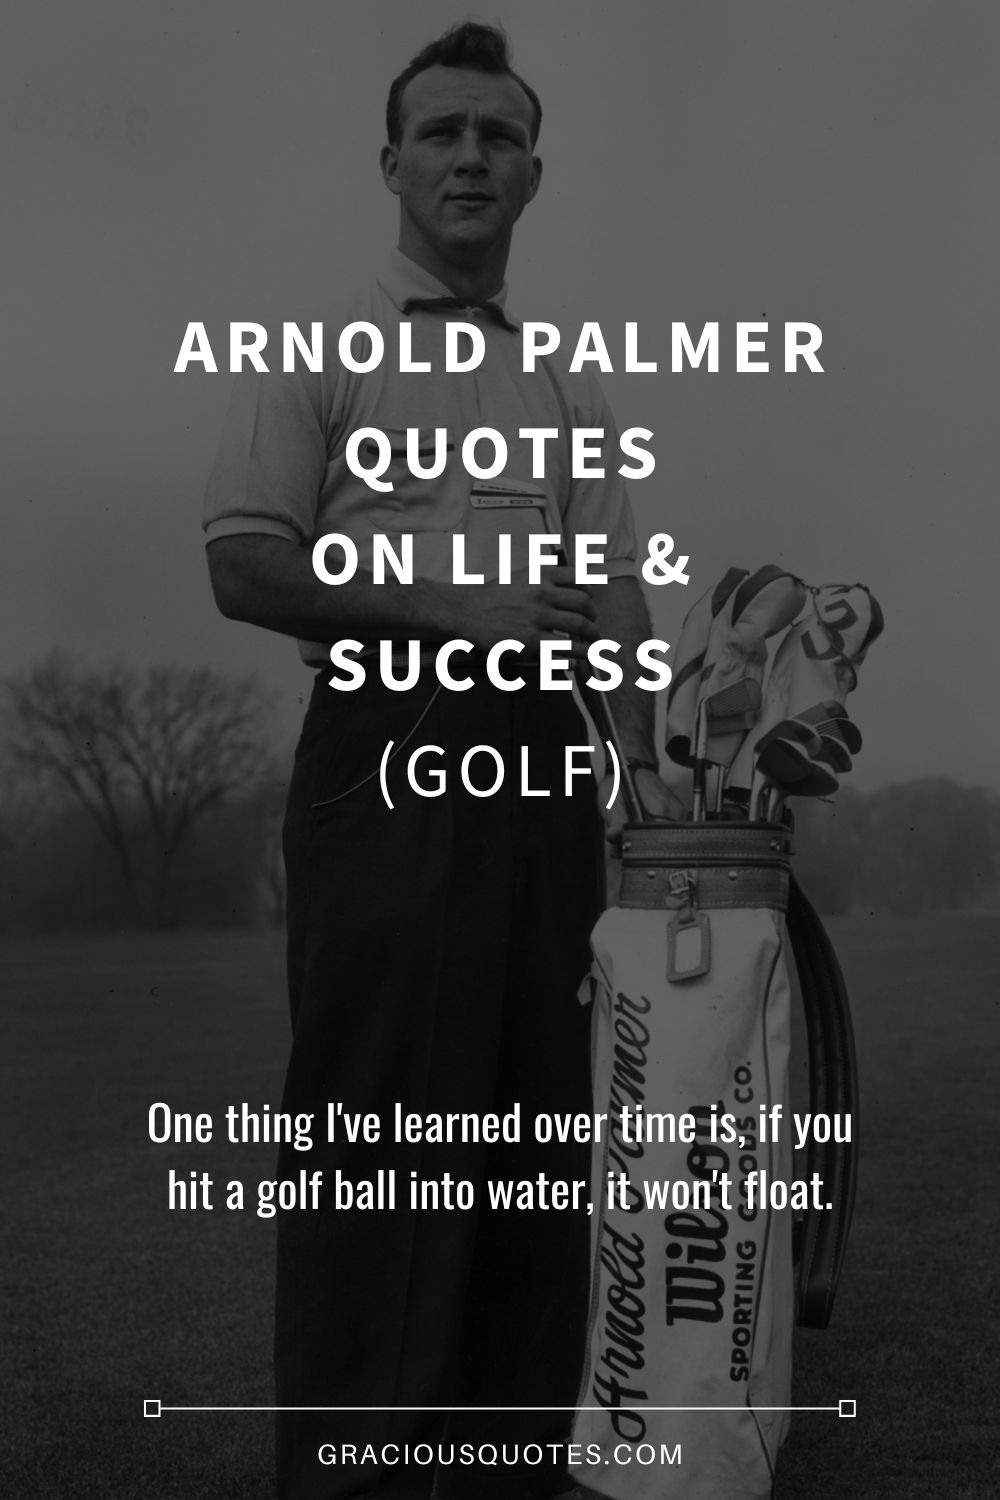 Arnold Palmer Quotes on Life & Success (GOLF) - Gracious Quotes